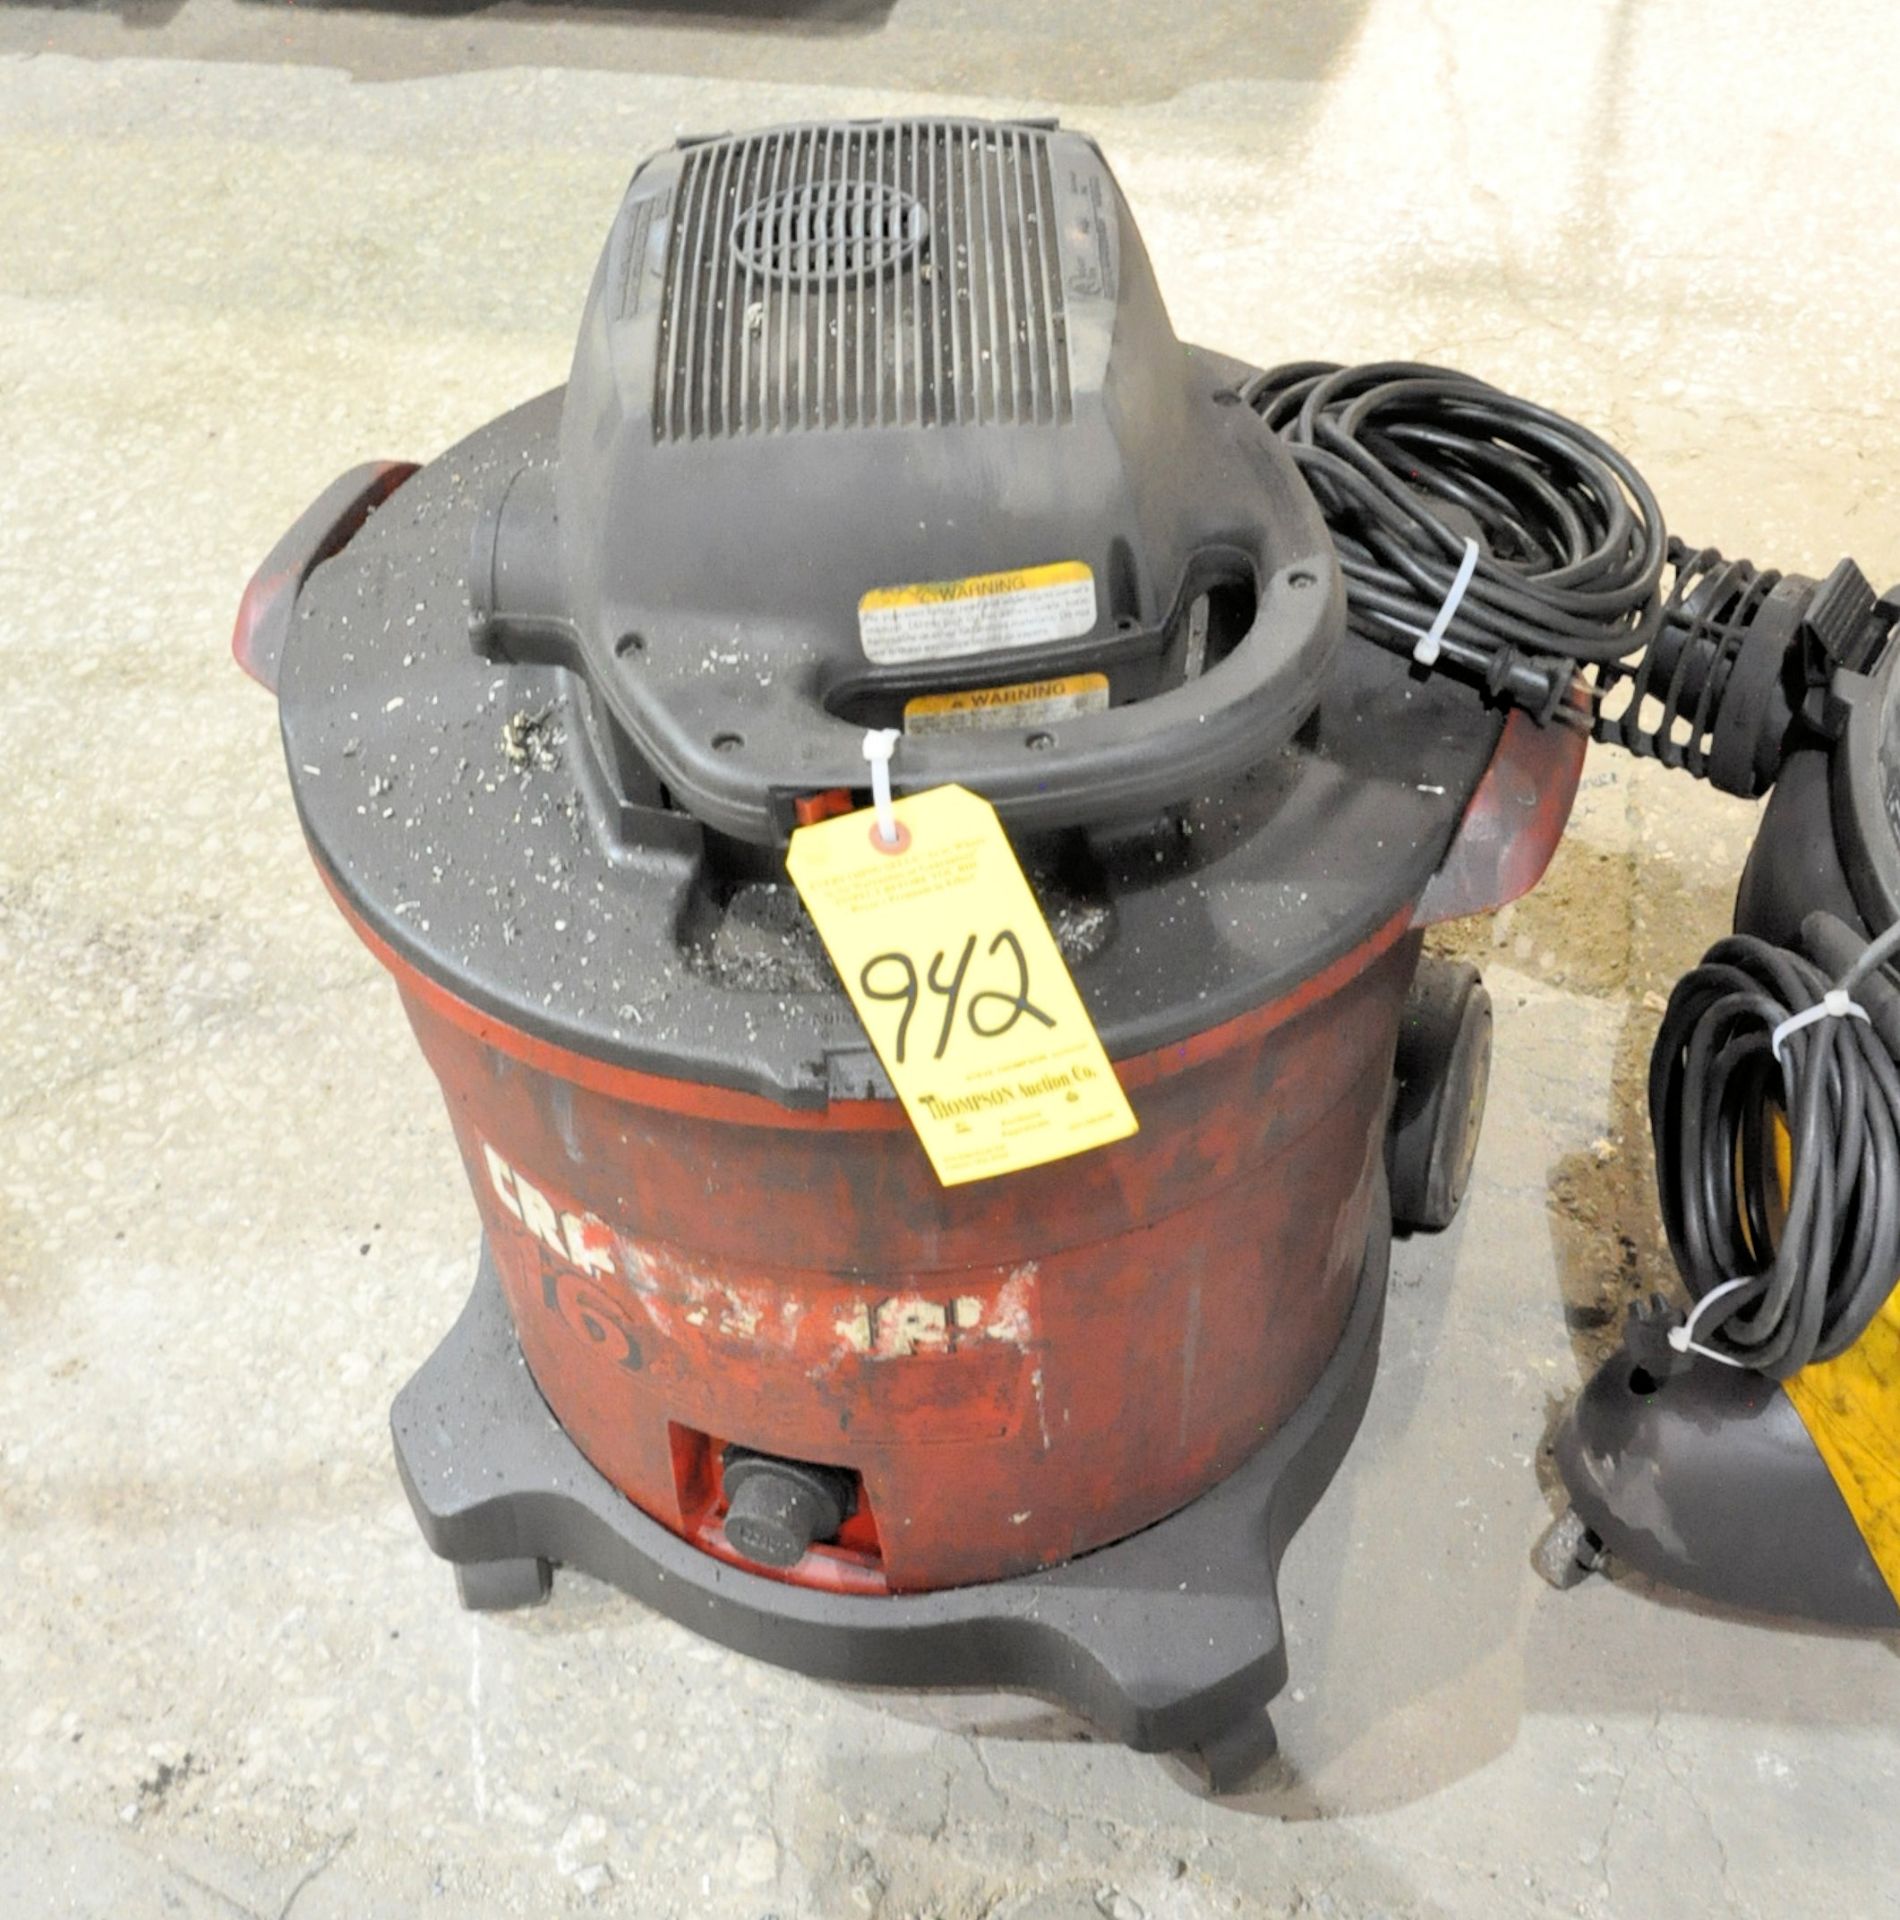 Craftsman Shop Vac, (Attachments Not Included), (Bldg 2)